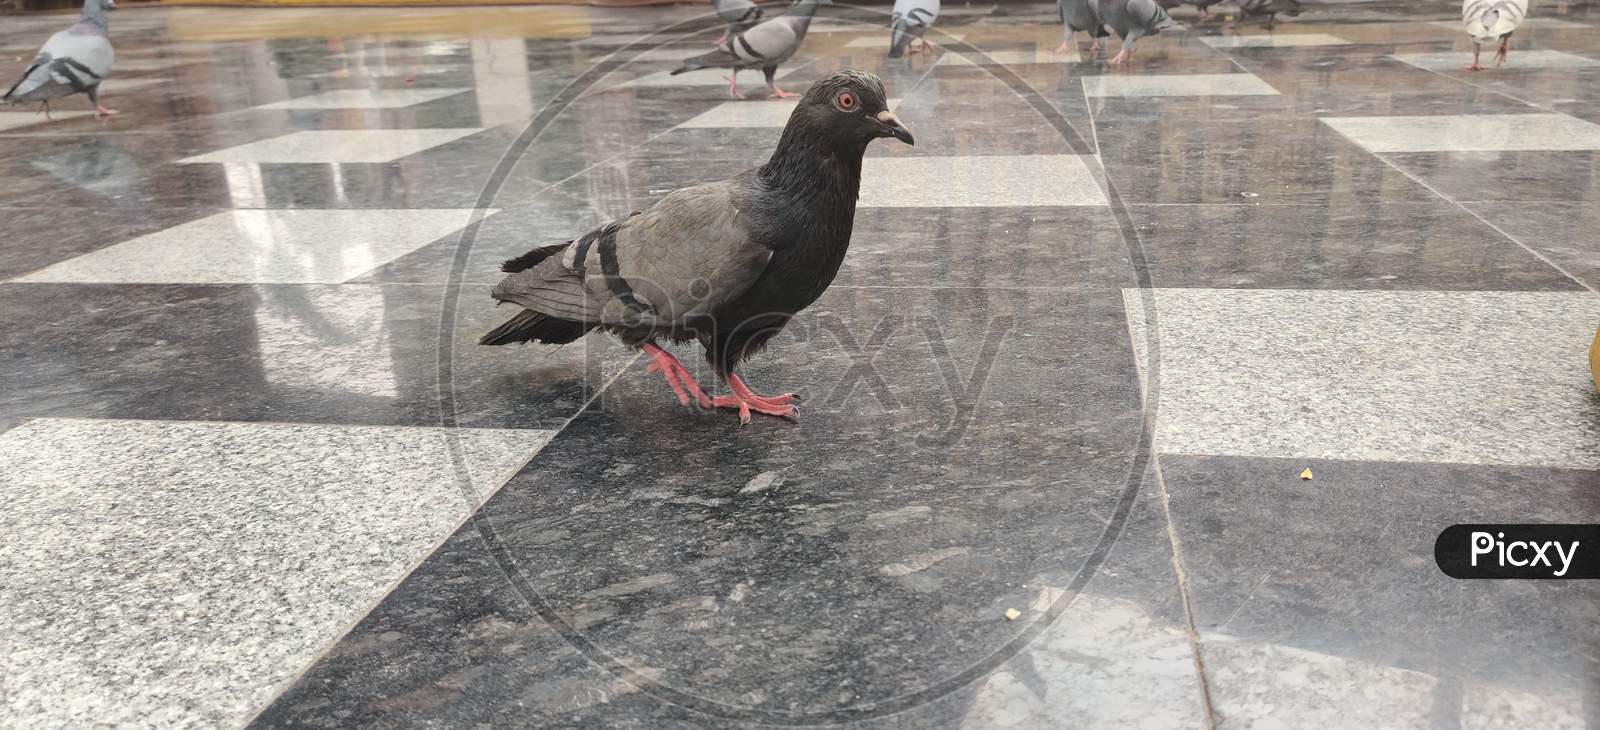 Pigeon in temple